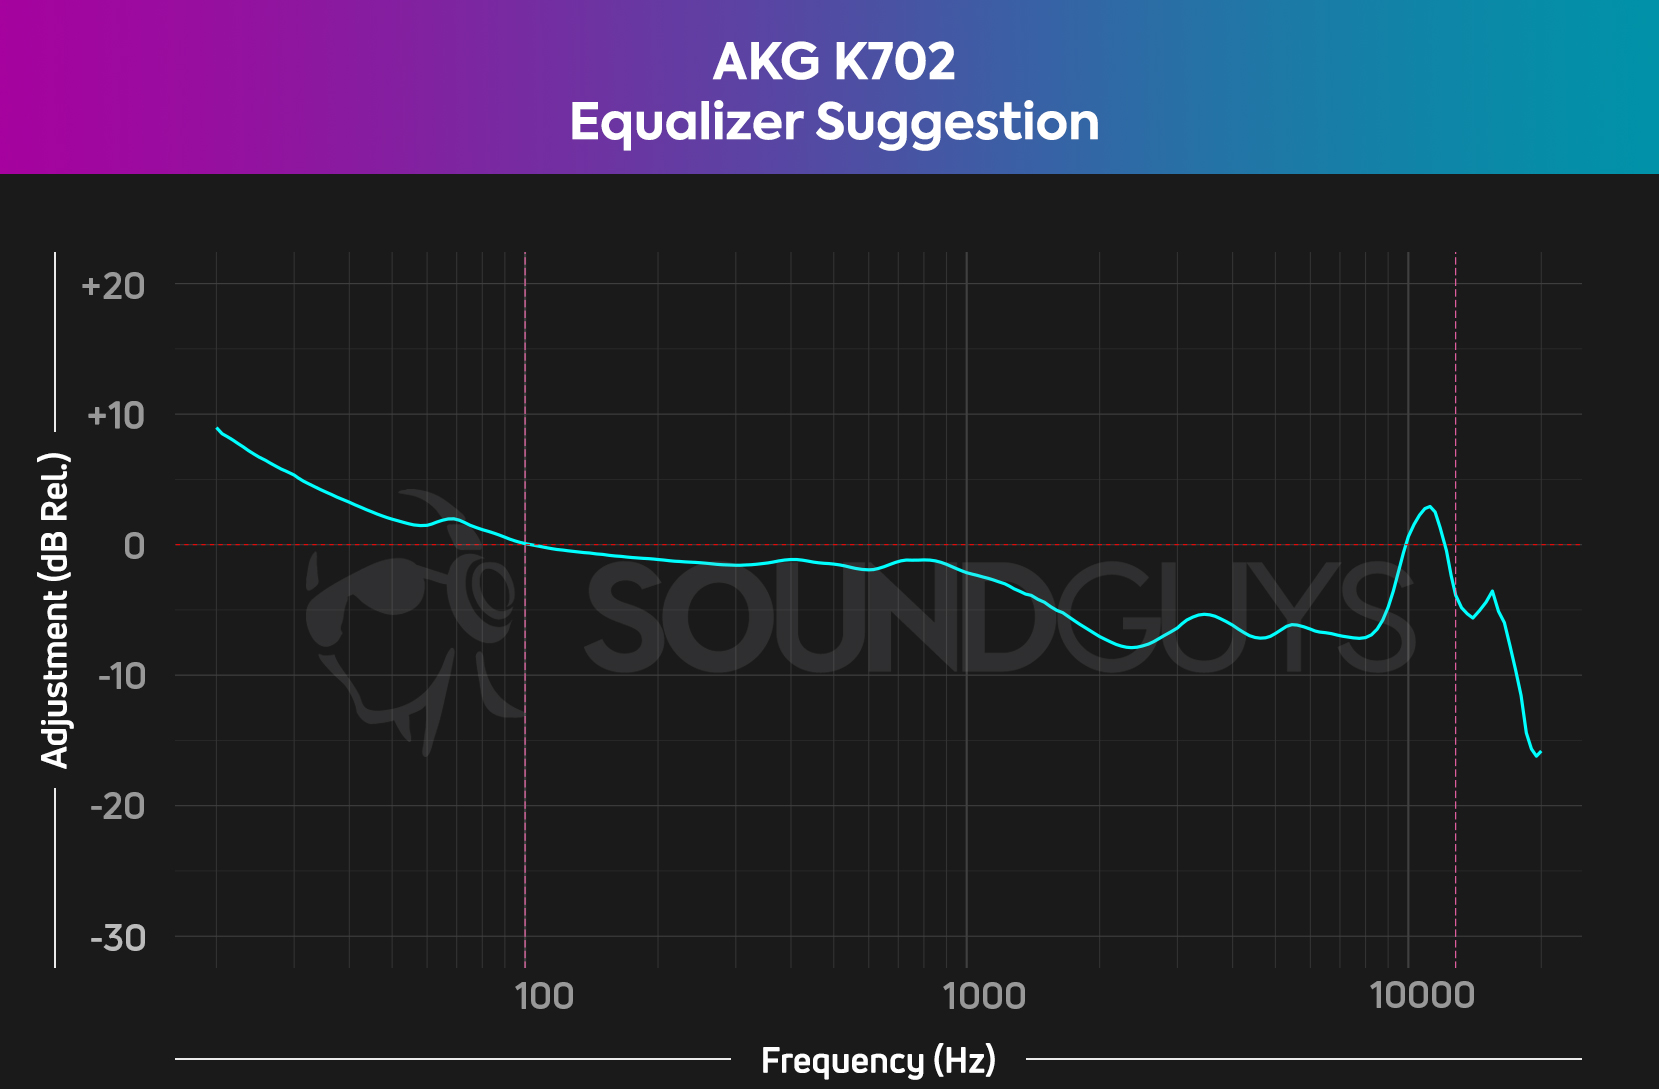 Our suggested equalizer settings in a chart to improve the sound of the AKG K702.